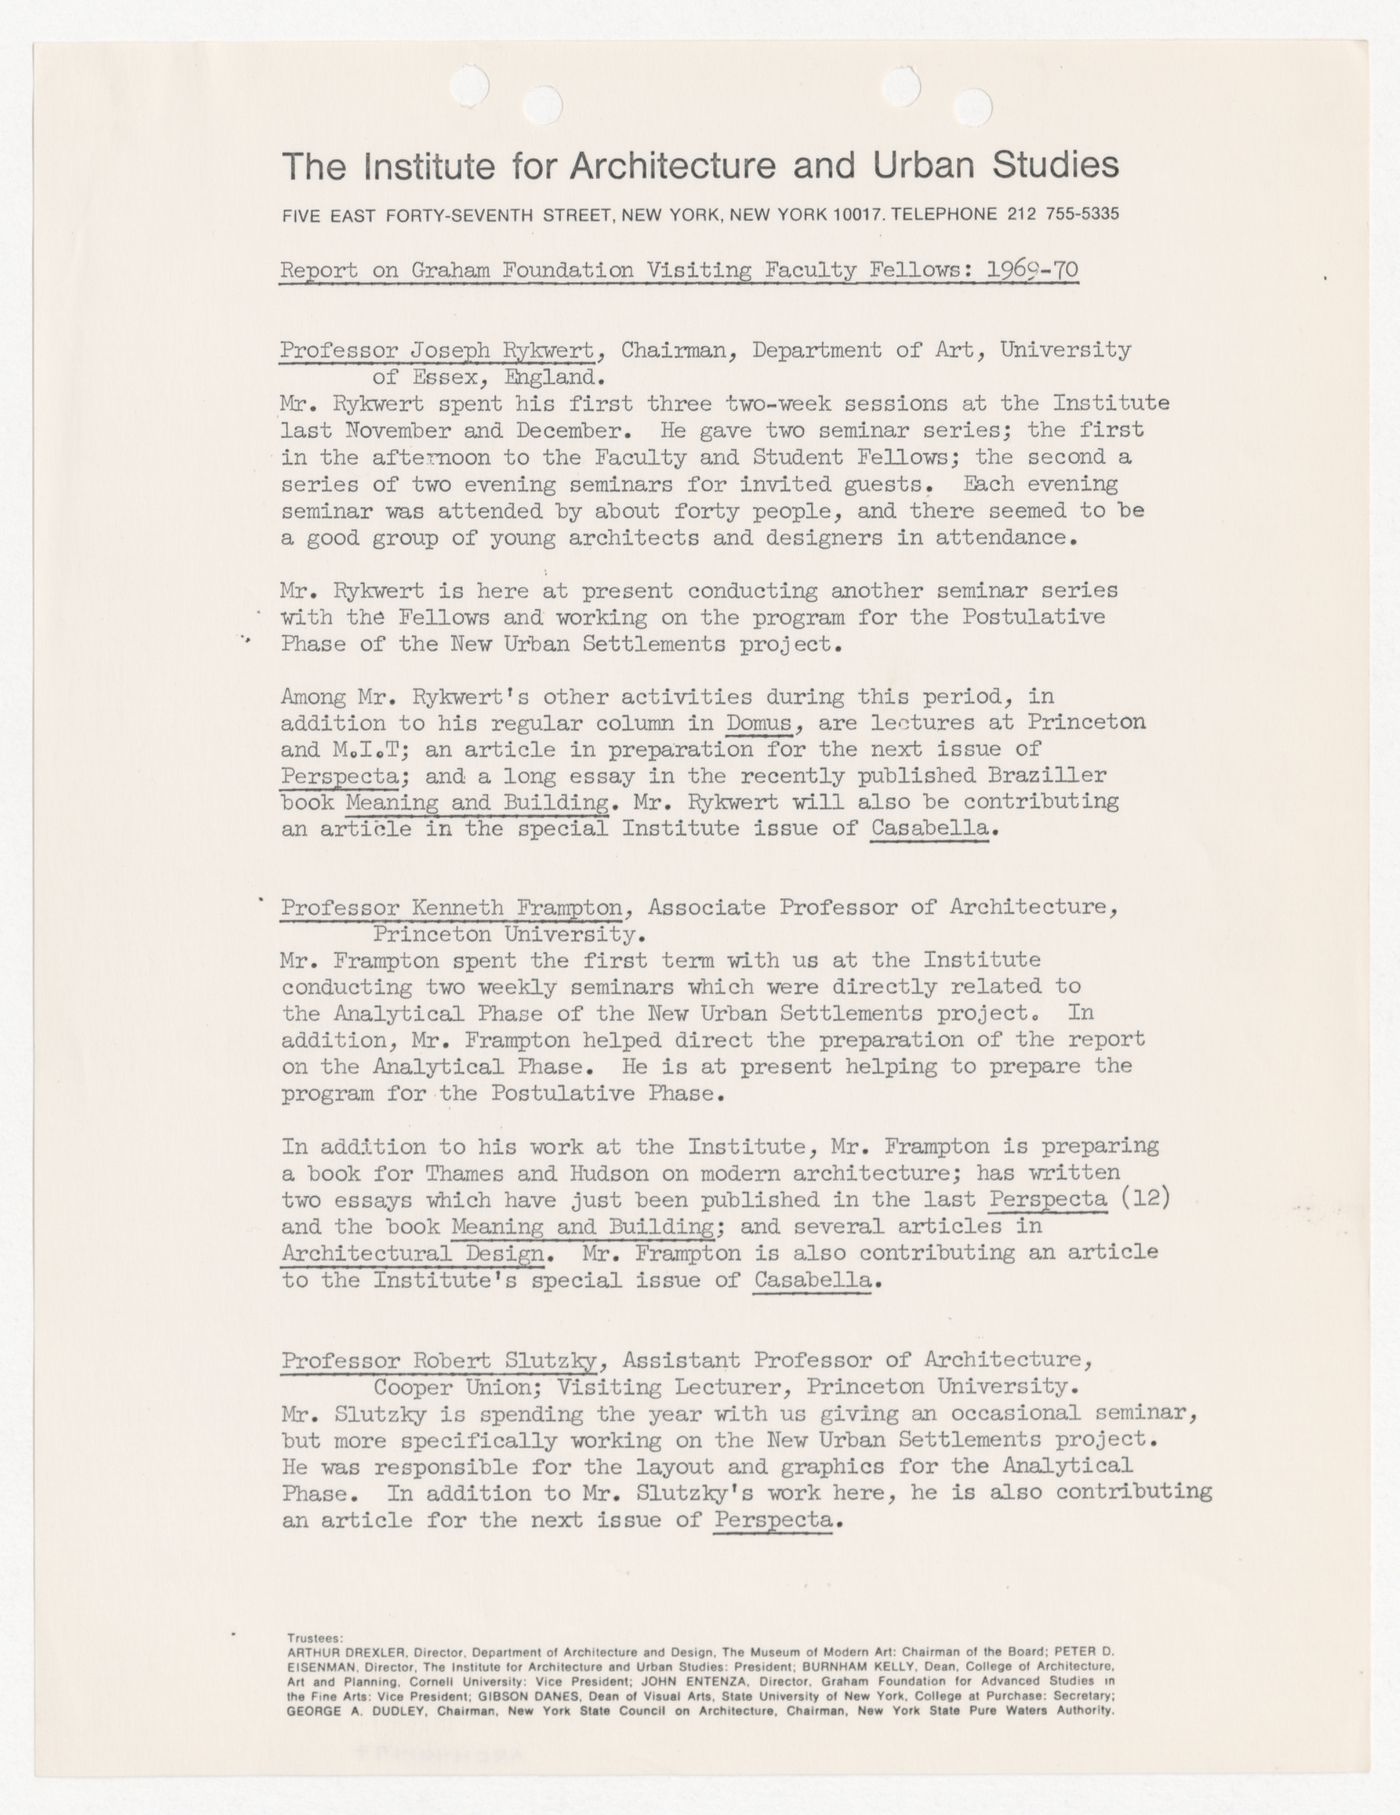 Report on Graham Foundation's Visiting Faculty Fellows for 1969-1970